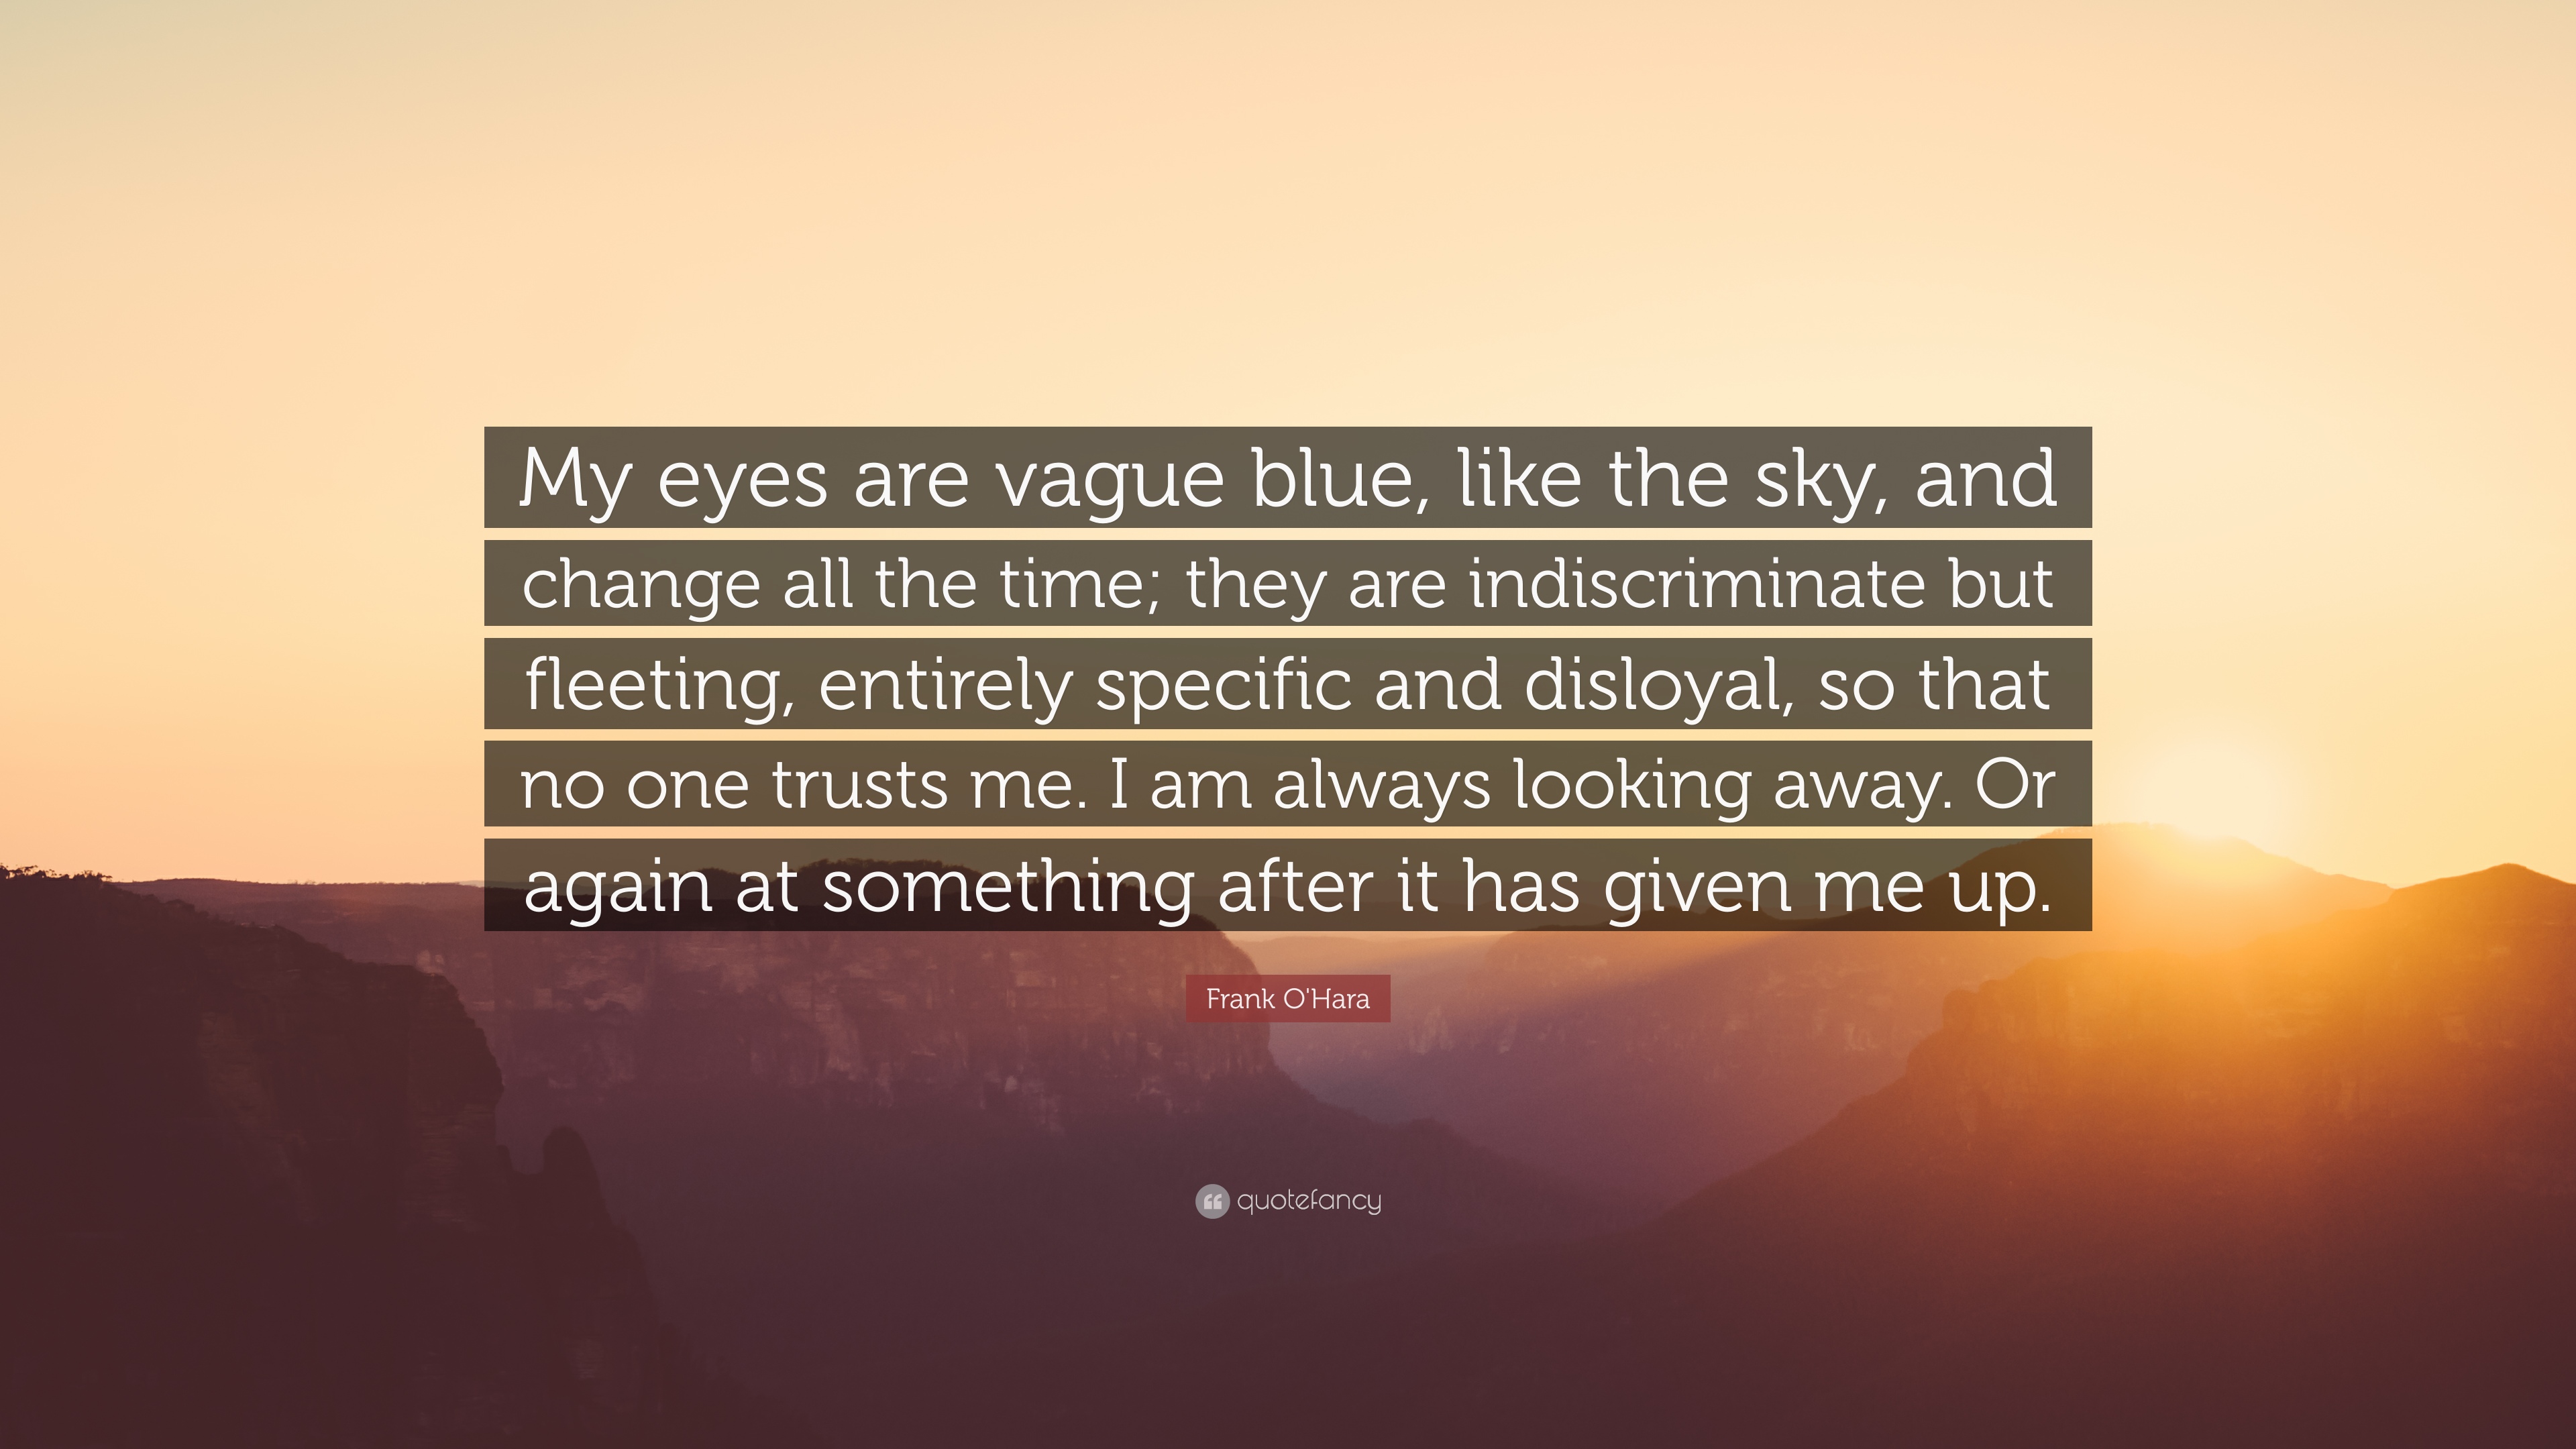 Frank O'Hara Quote: “My eyes are vague blue, like the sky, and ...